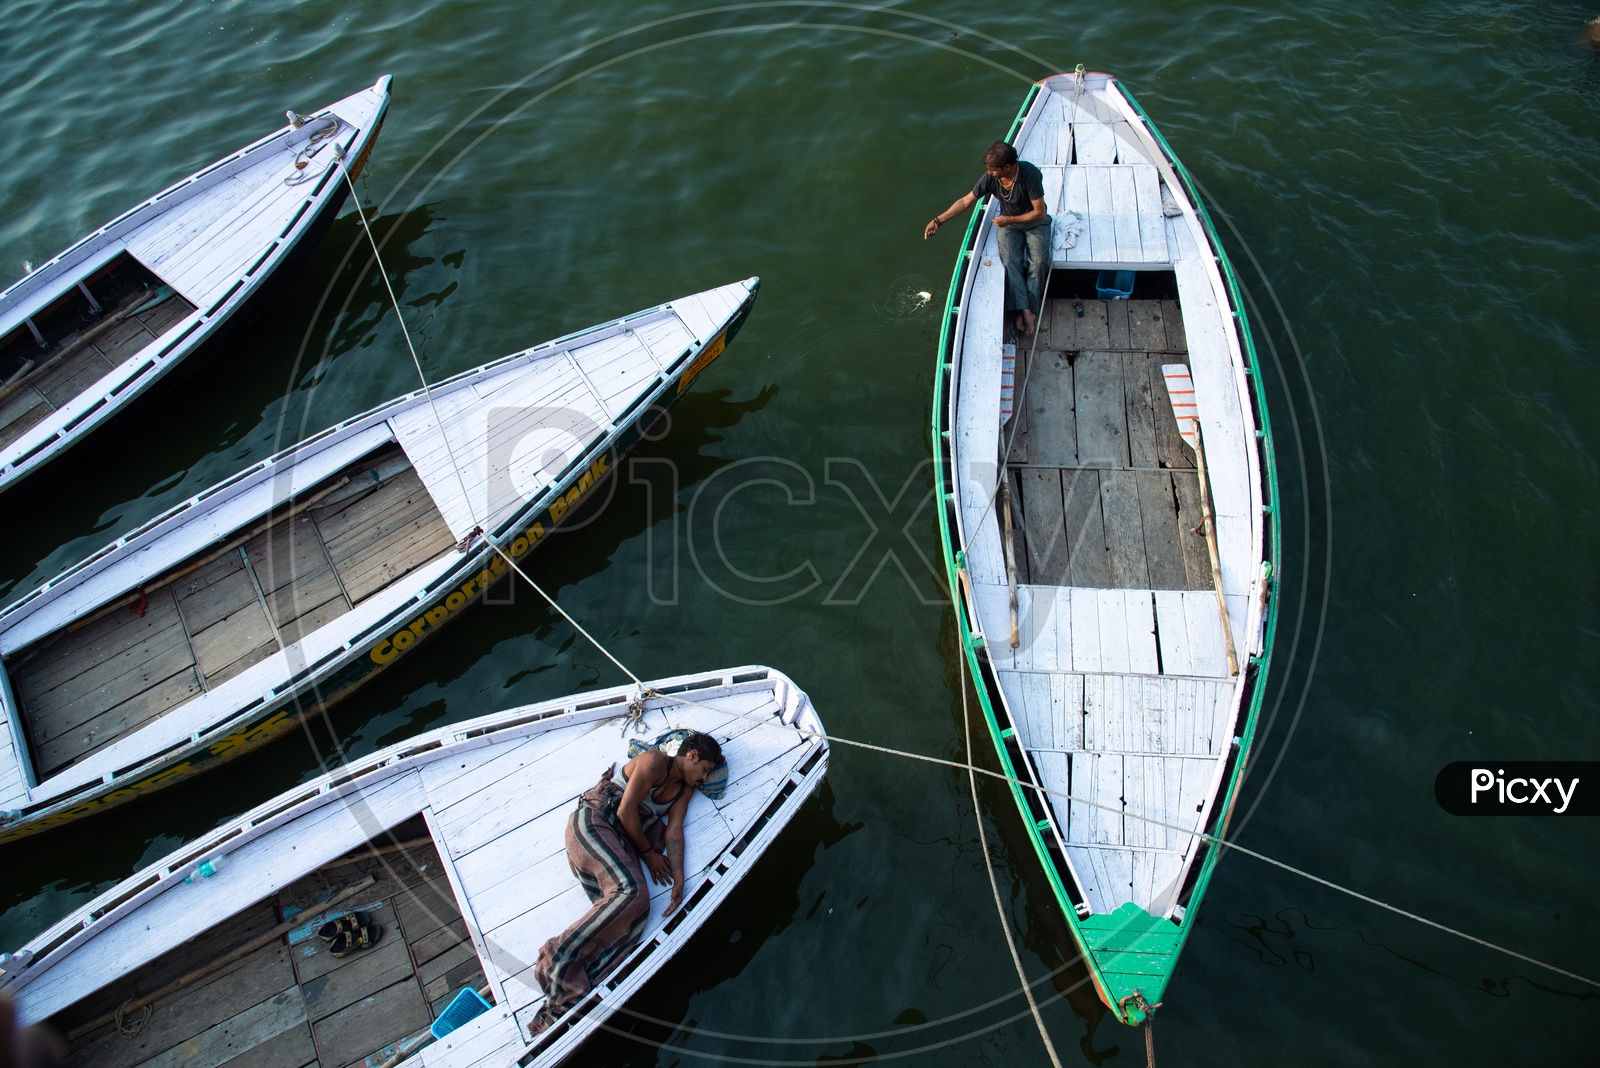 A Boat Driver Or Helmsman  Sleeping On Boat  by Anchoring at Ghats In  Varanasi